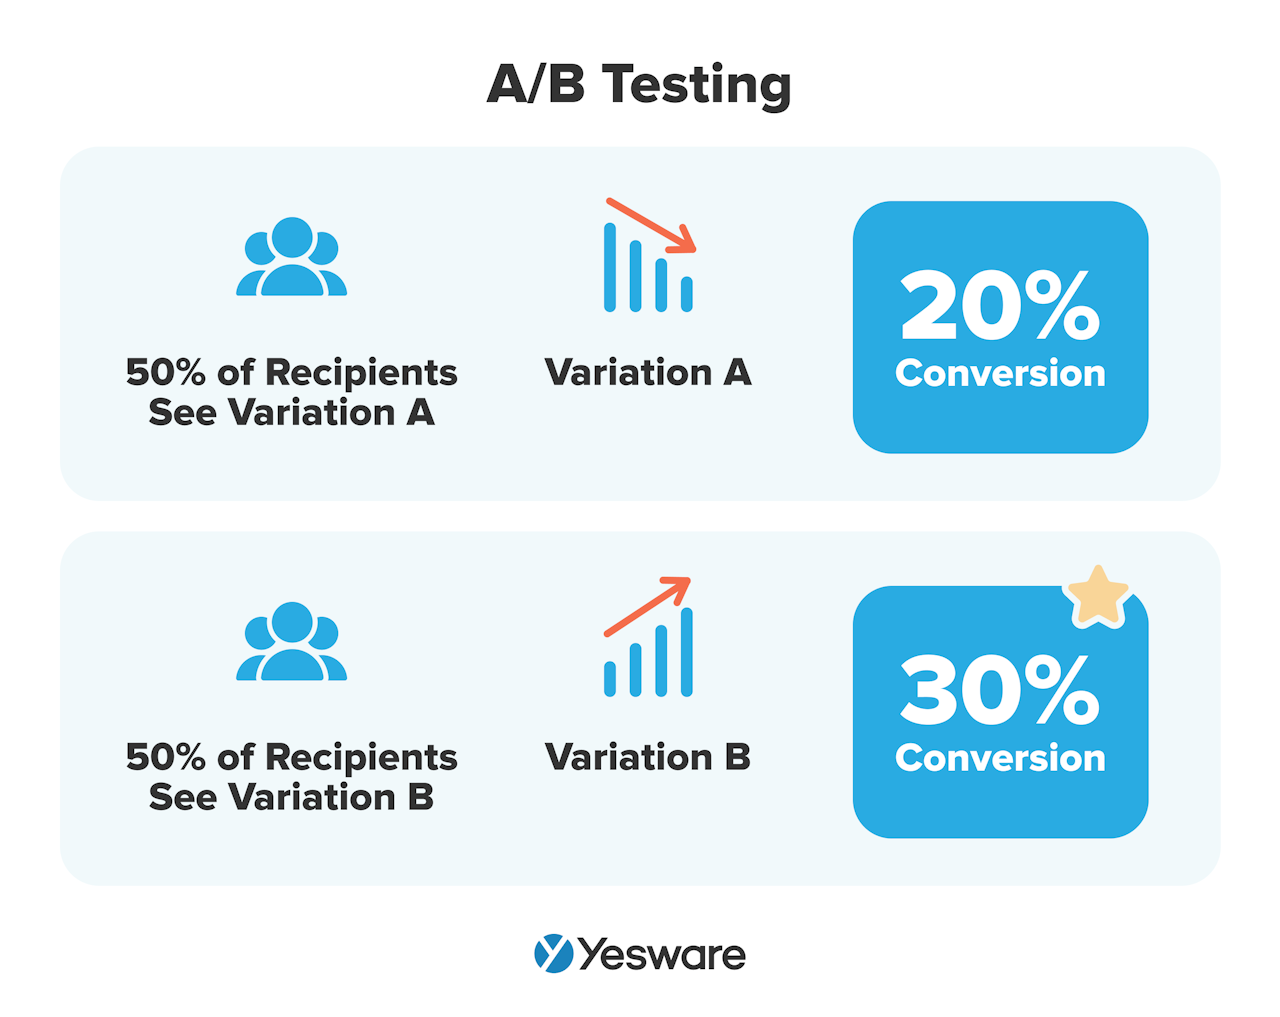 sales outreach management tools: A/B testing